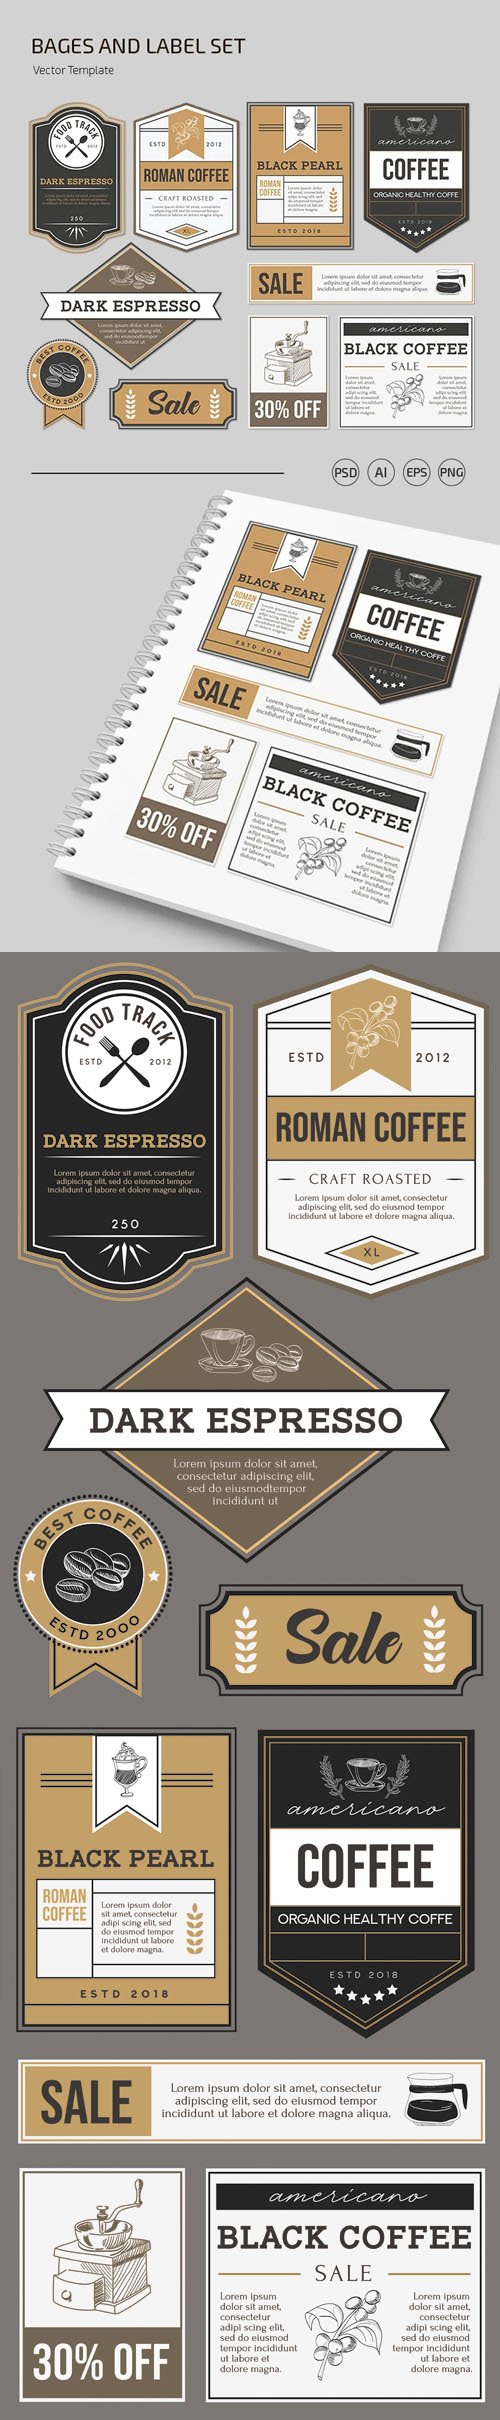 10 Bages & Labels (Ai/EPS/PSD) Templates Dedicated to Cafes & Restaurants